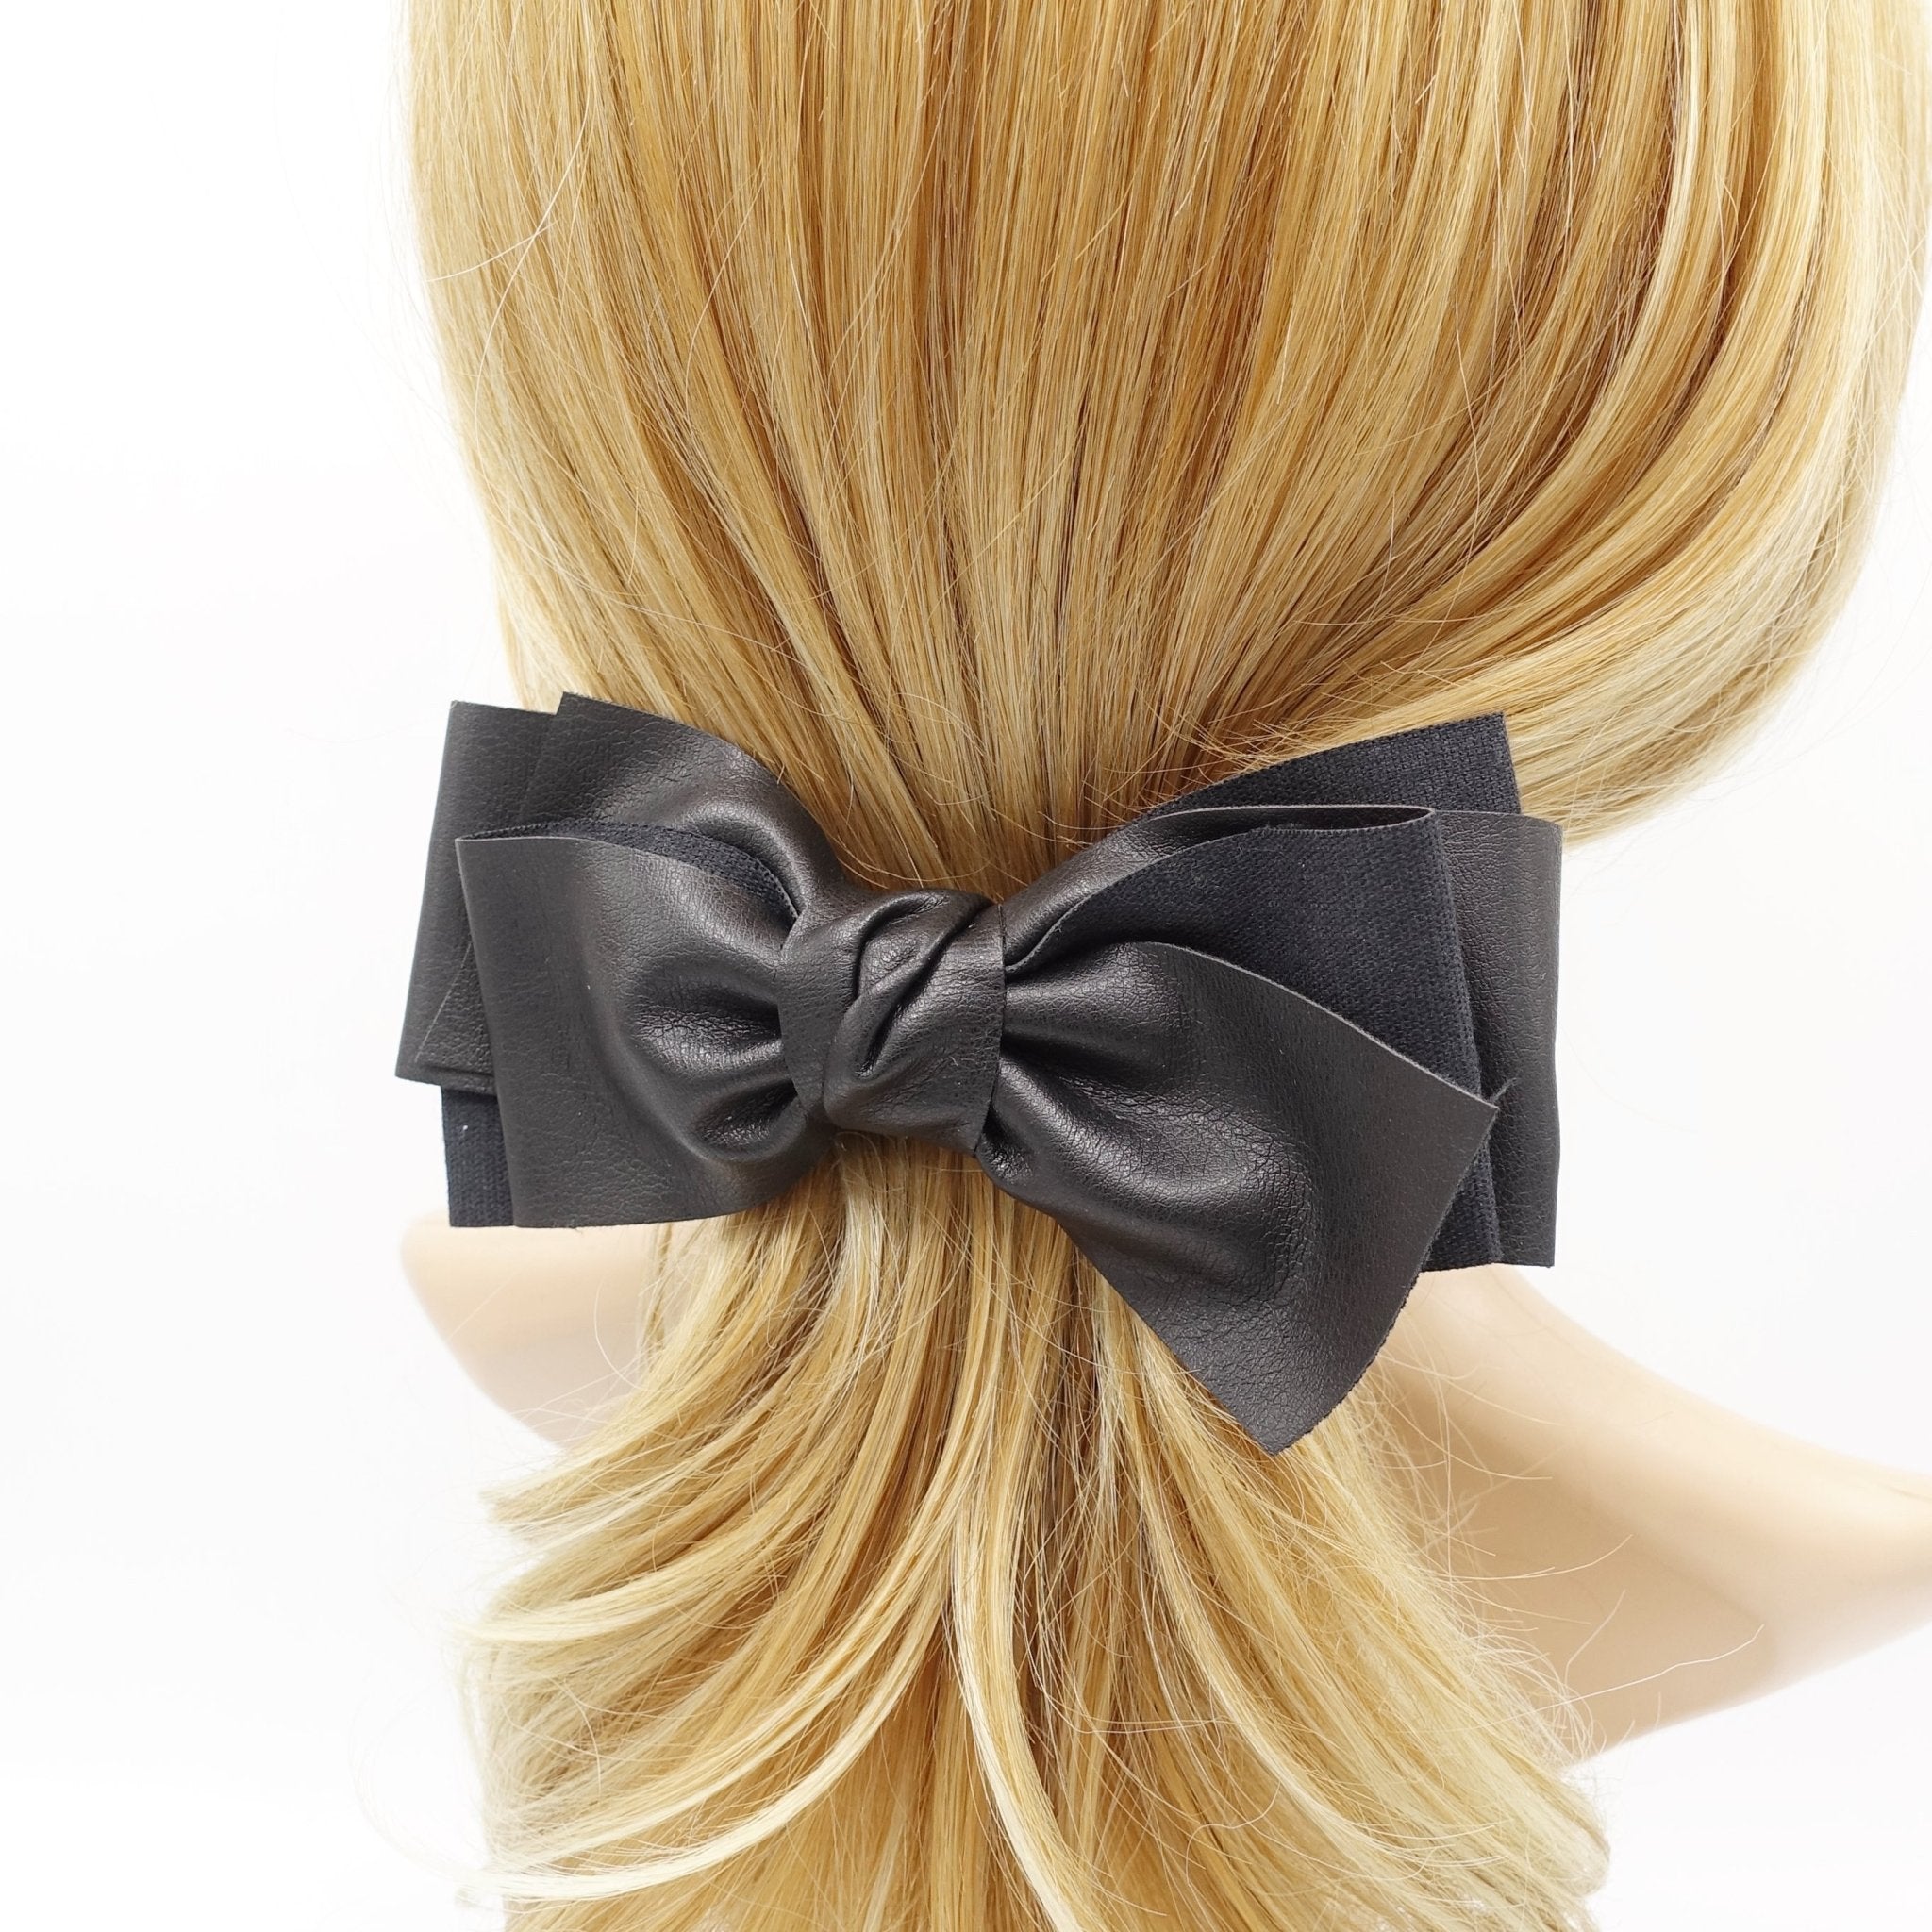 veryshine Barrettes & Clips Black leather hair bow multi layered stylish Fall Winter hair accessory for women